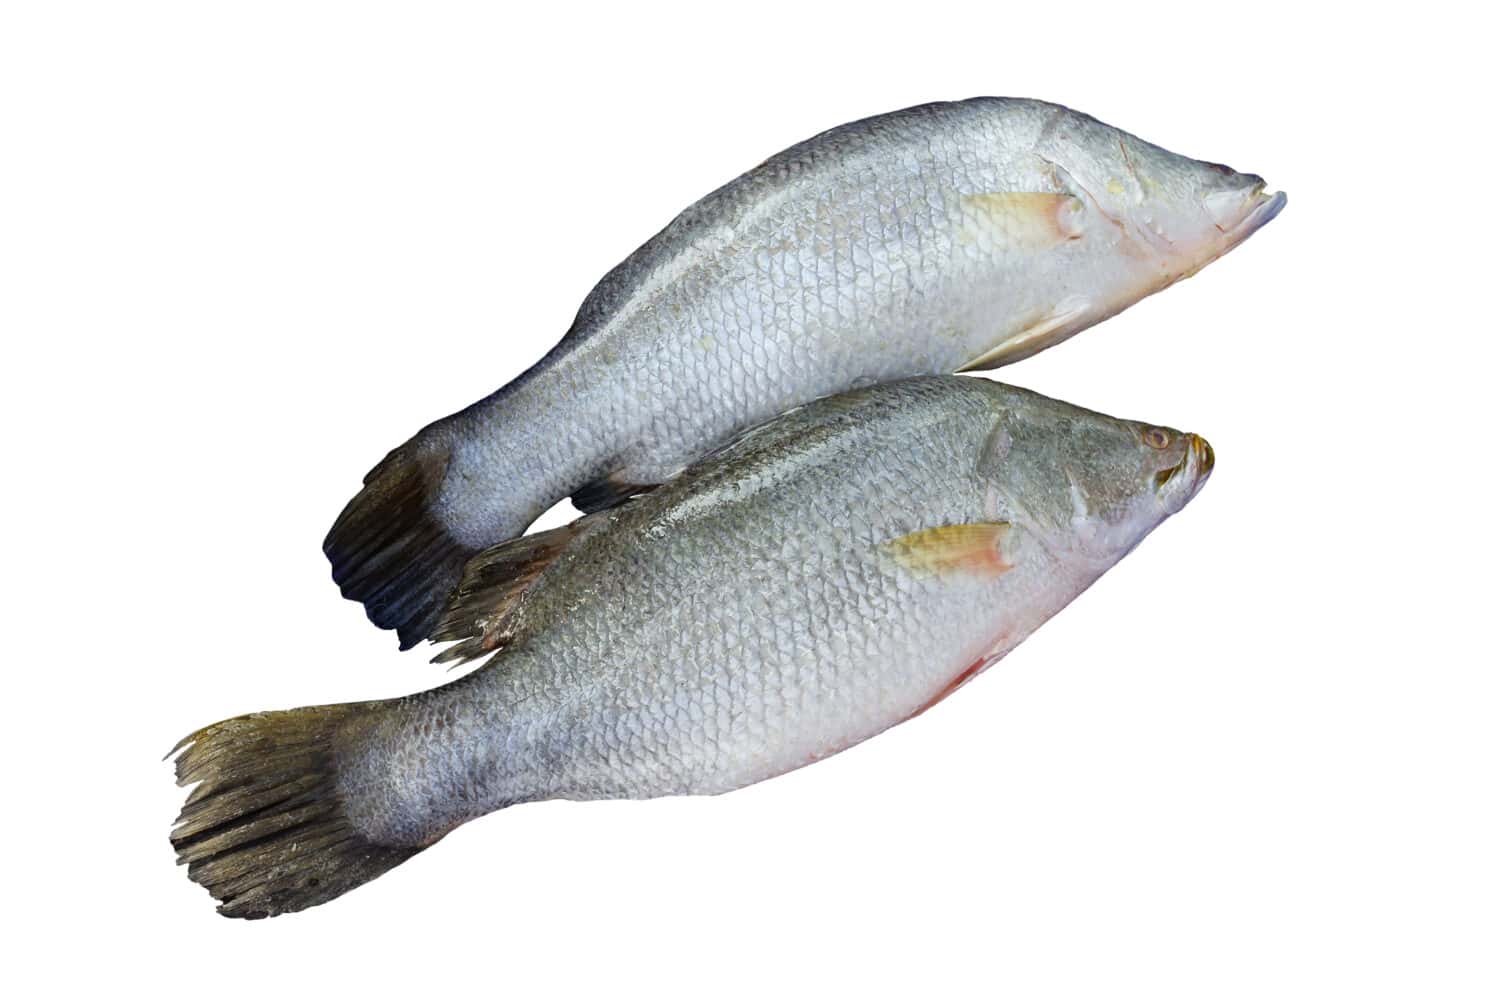 Pair of Silver perch or white perch isolated on white background